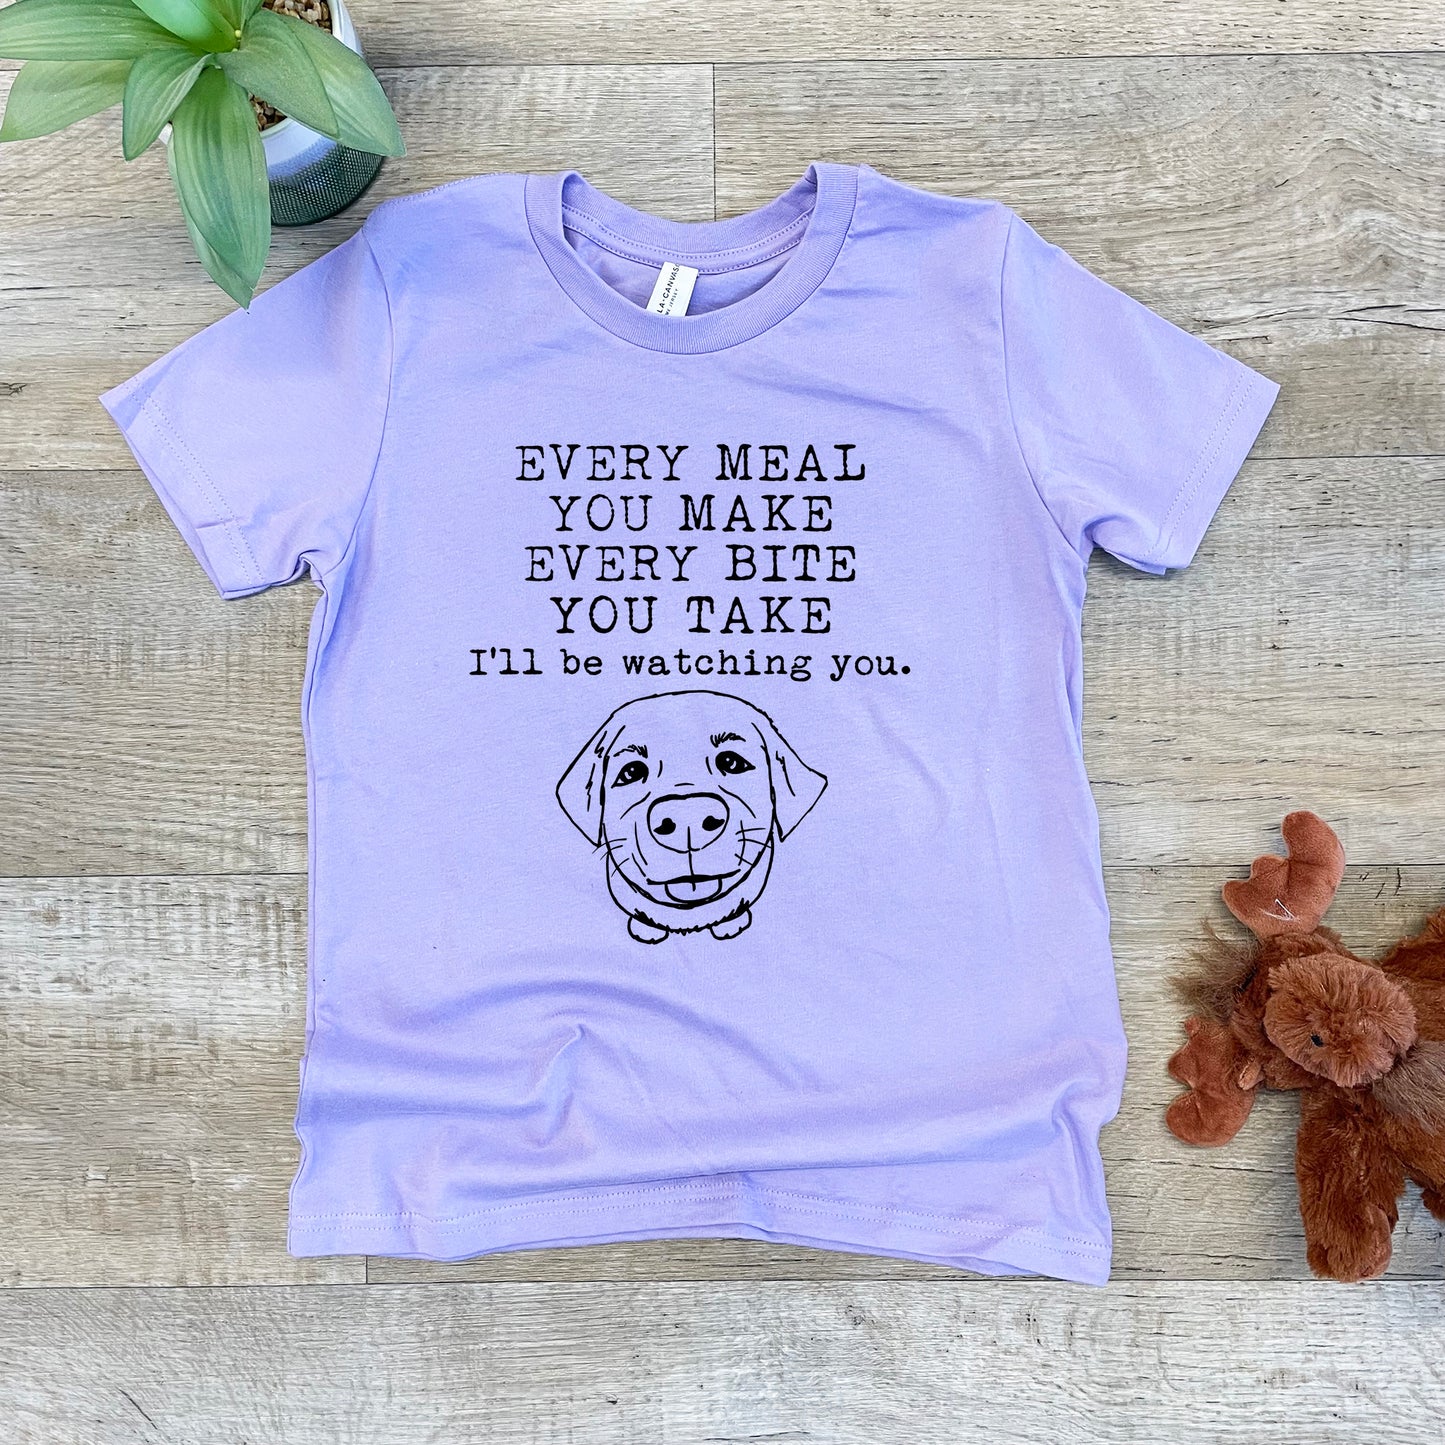 Every Meal You Make, Every Bite You Take, I'll Be Watching You - Kid's Tee - Blue or Lavender